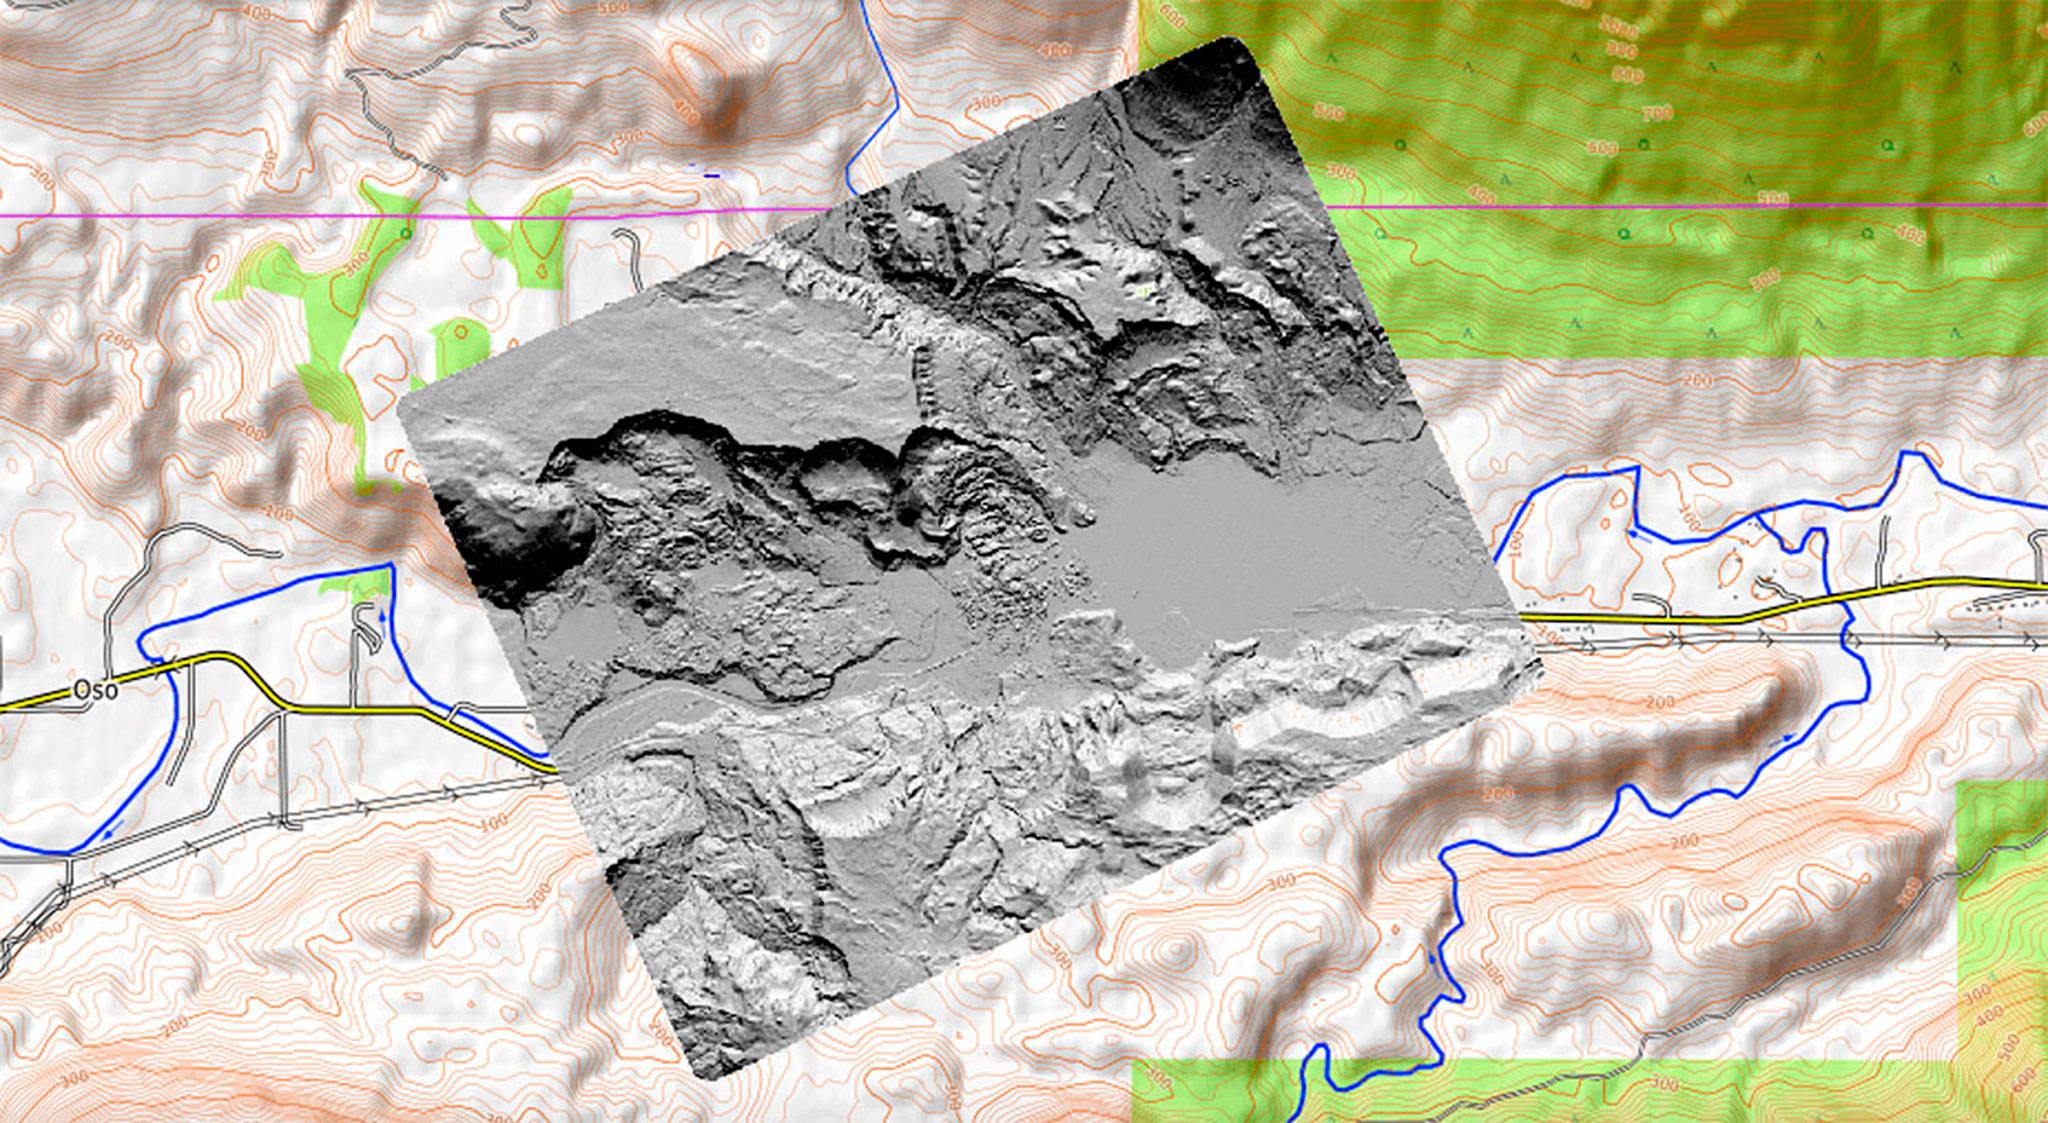 A lidar (light detecting and ranging) image of the area of the March 22, 2014 Oso landslide is shown superimposed over a map of the landslide area along Highway 530 and the Stillaguamish Valley. (Washington State Department of Natural Resources)